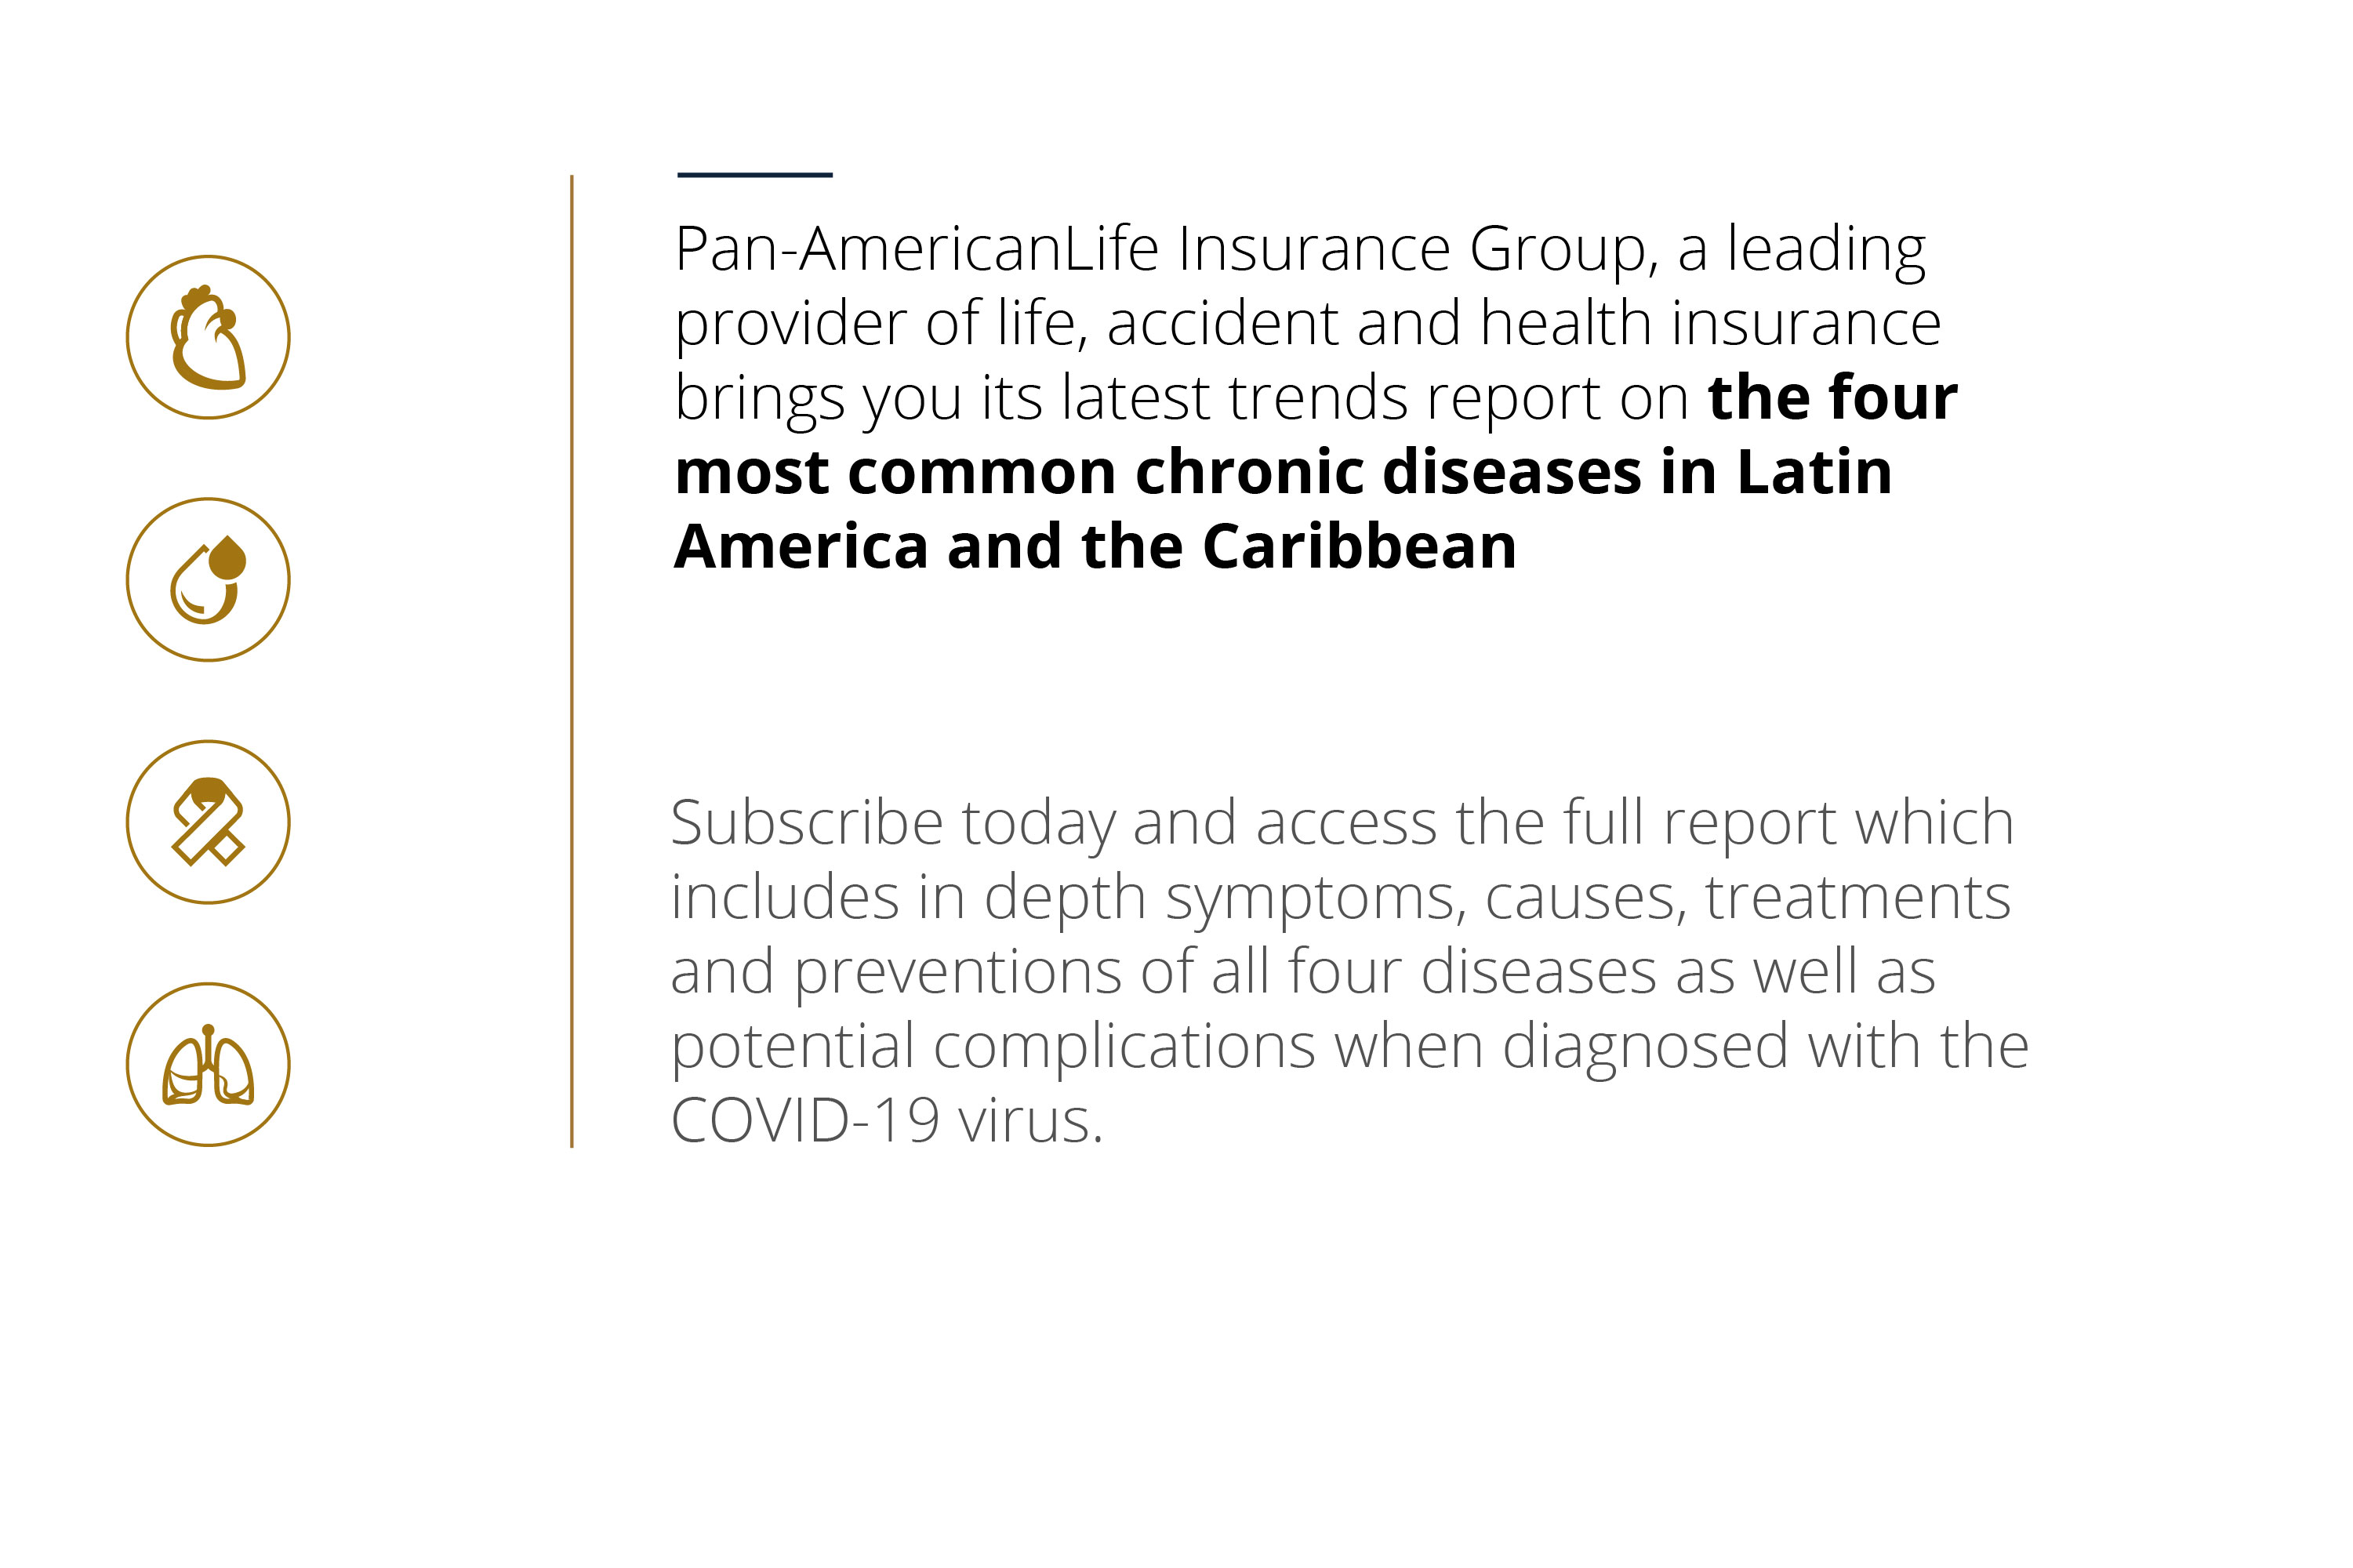 paragraph inviting to subscribe to the PALIG "Chronic Diseases" report